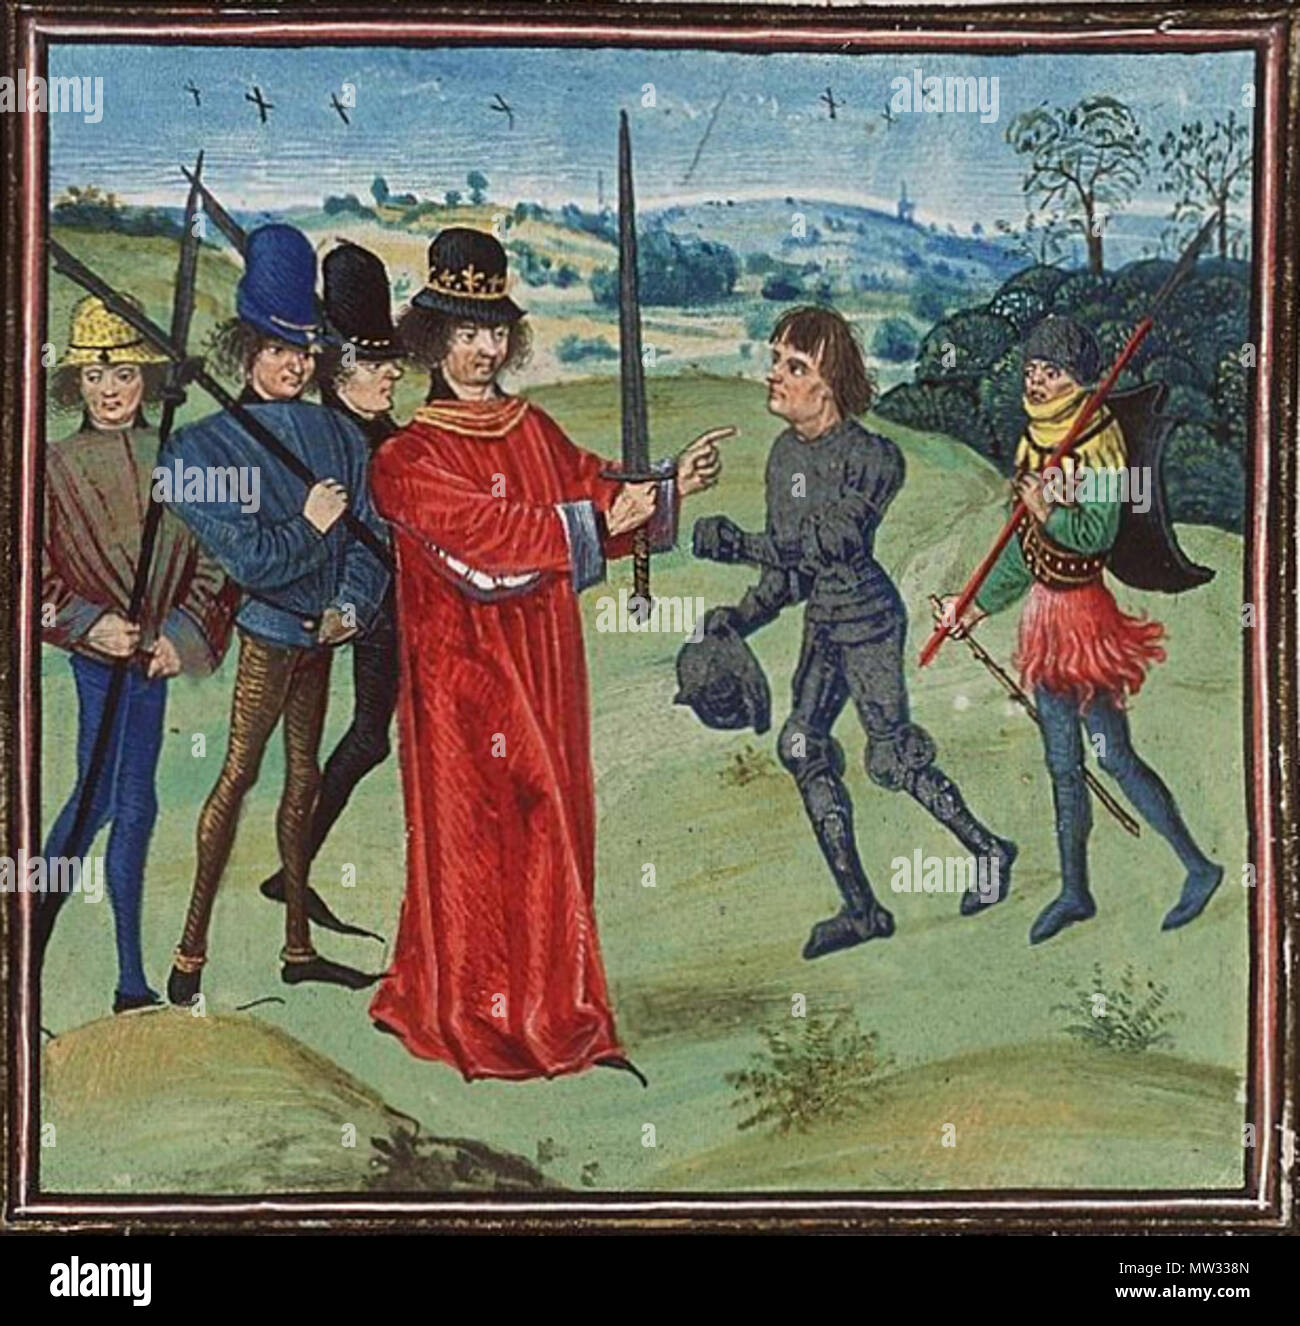 English: Institution of Baldwin I 'Bras de Fer', the first count of  Flanders by Charles the Bald, the Frankish king Contents: Aegidius of Roya,  Compendium historiae universalis Place of origin, date